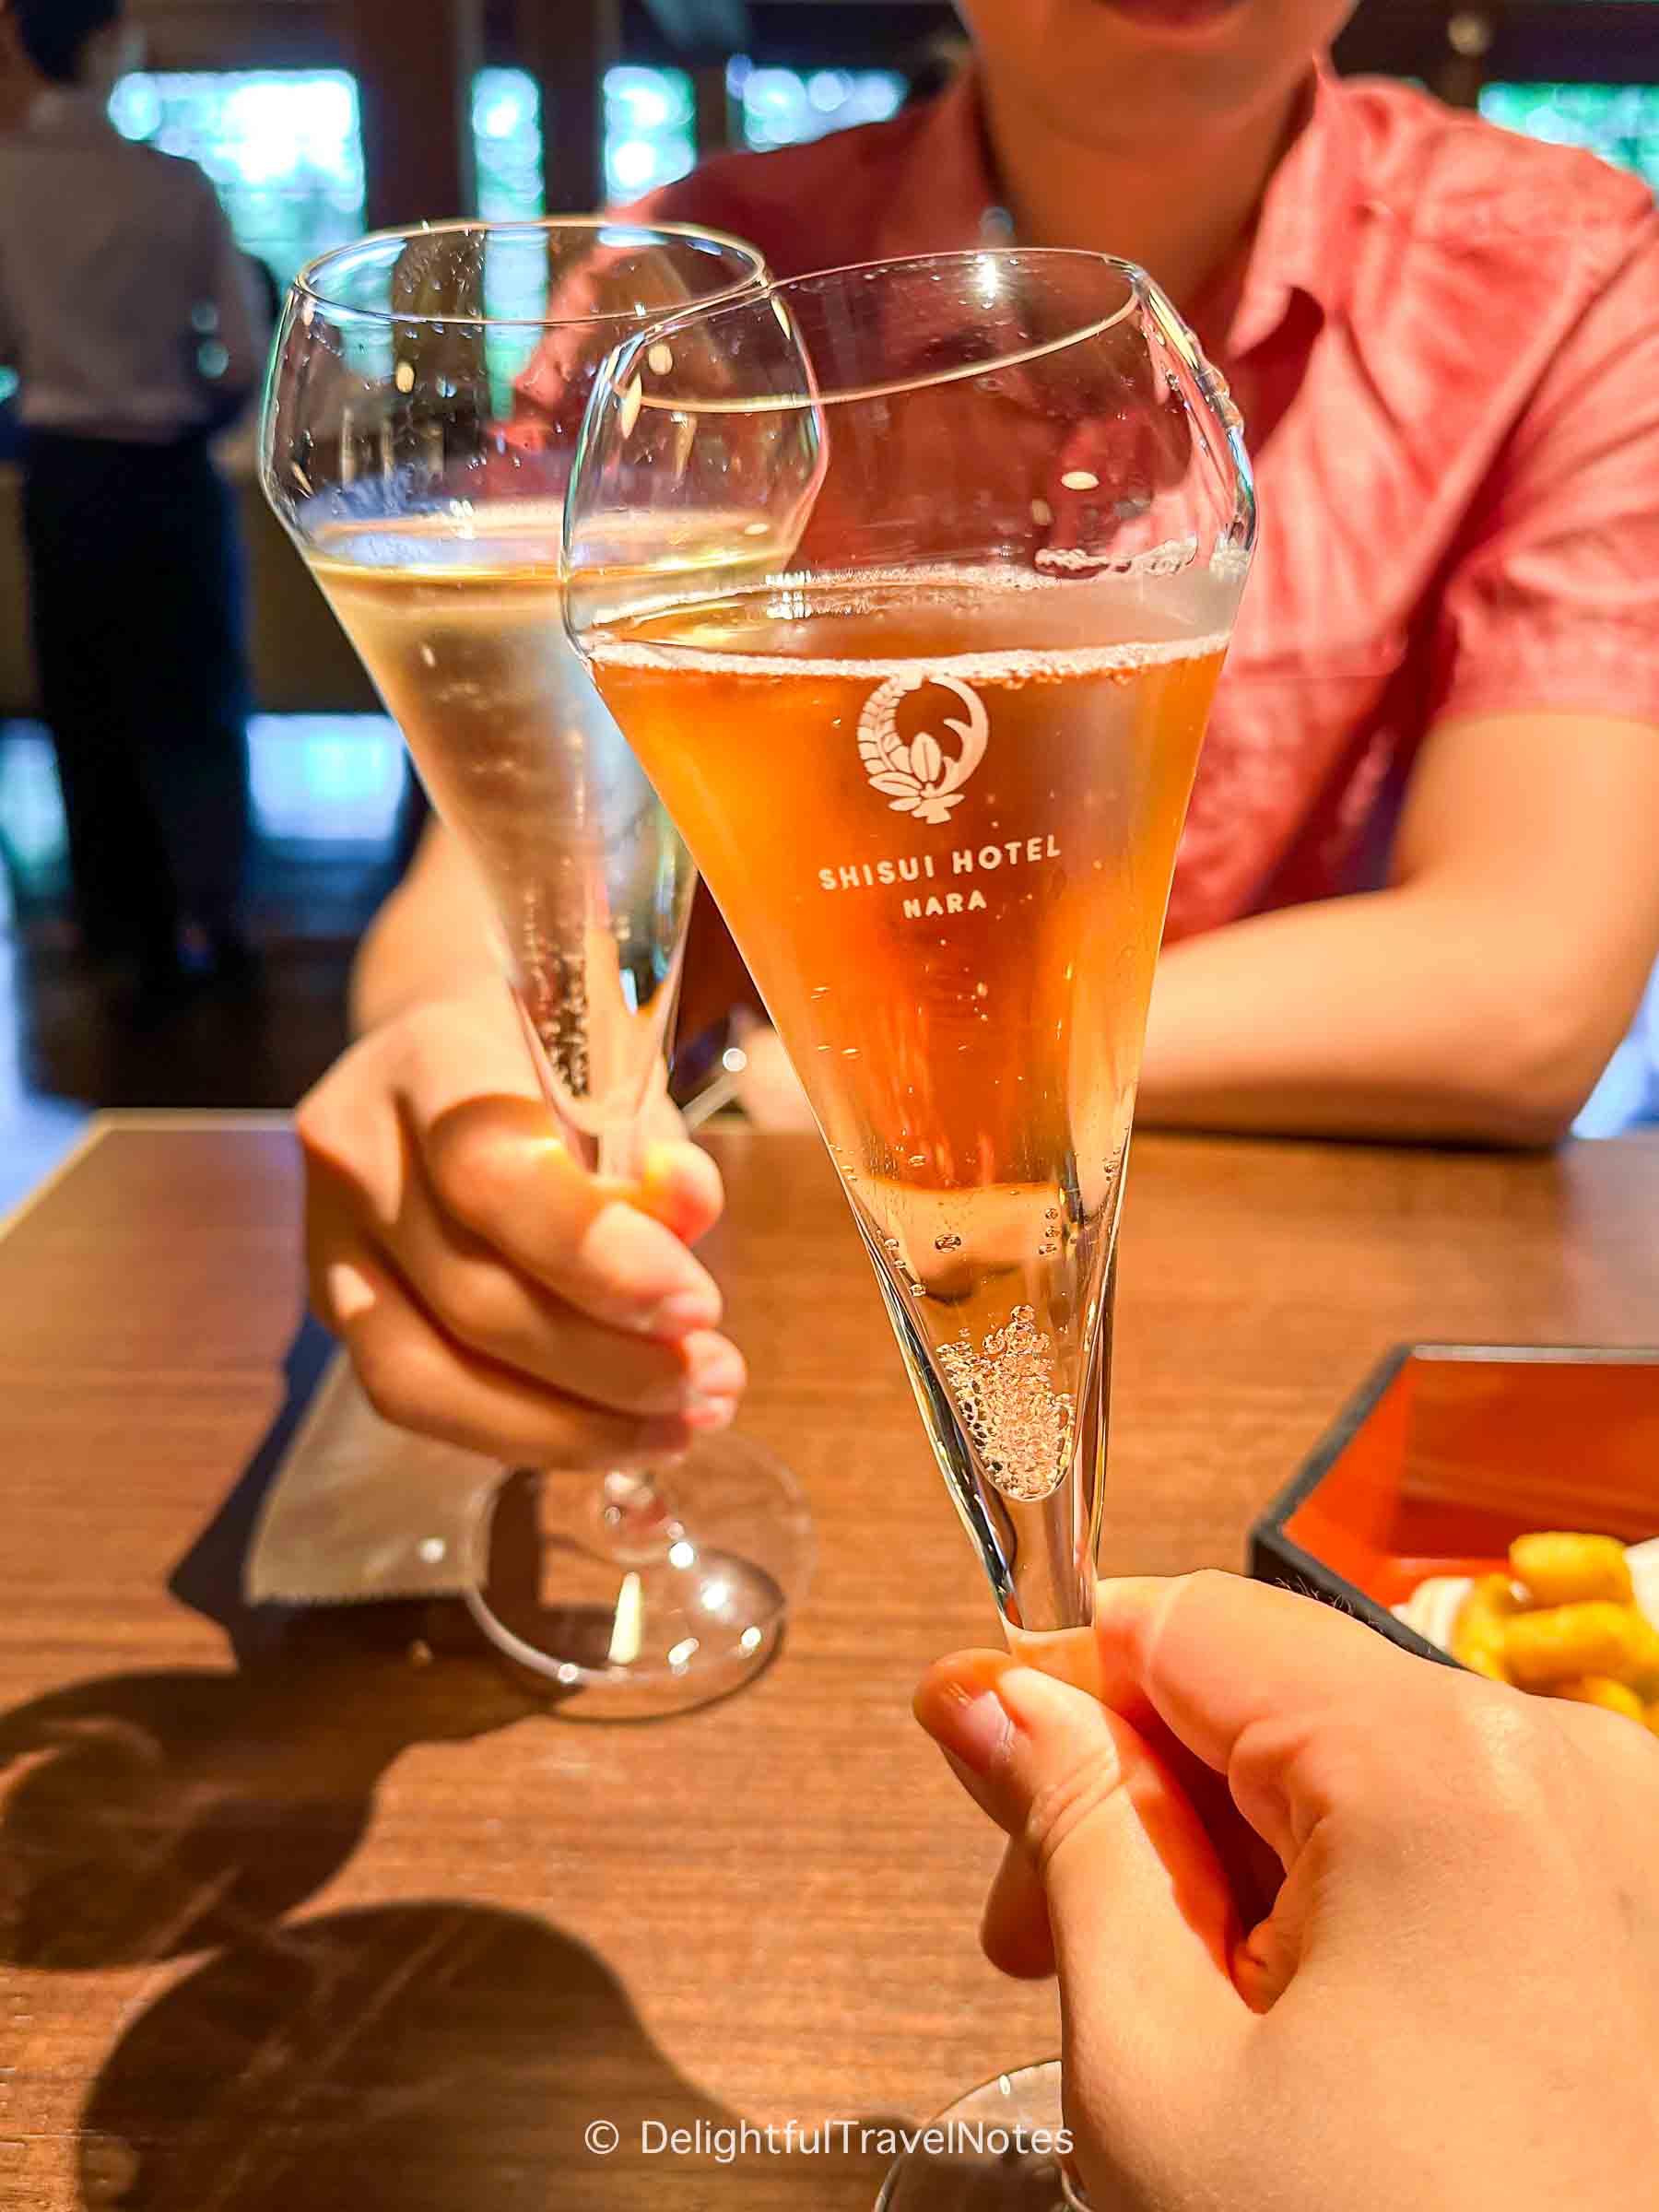 two hands holding two glasses of champagne during the happy hour at Shisui Hotel Nara.